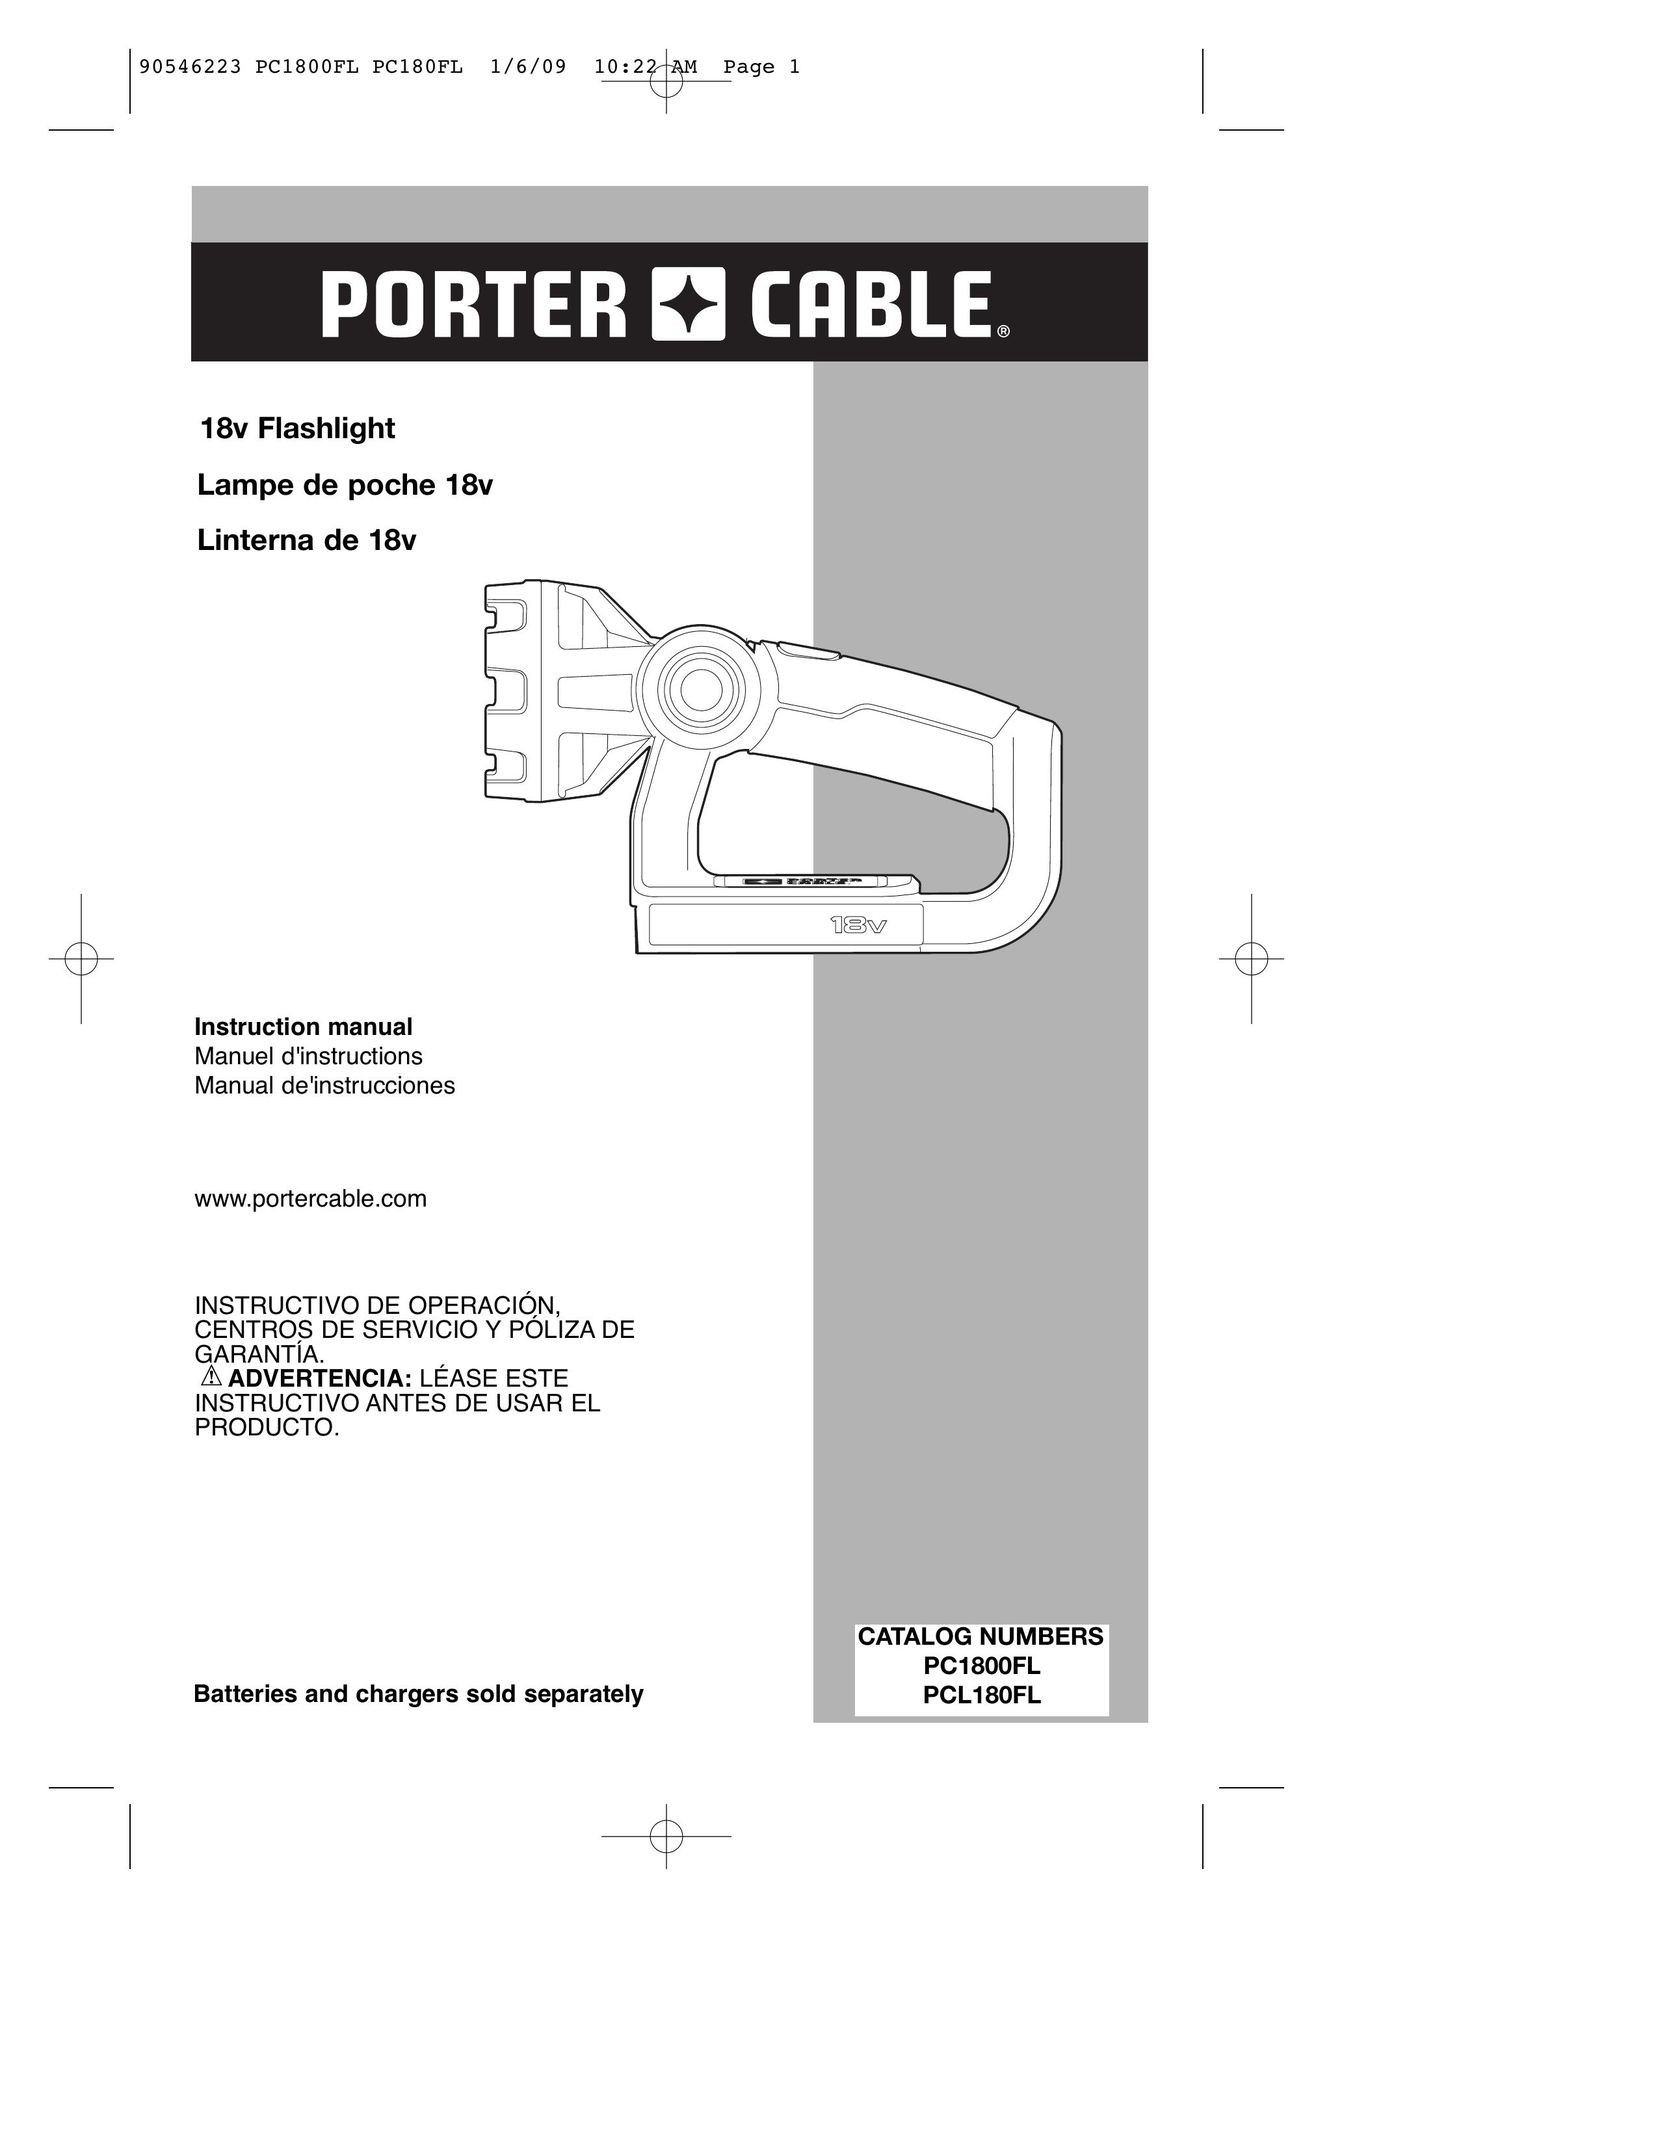 Porter-Cable 90546223 Home Safety Product User Manual